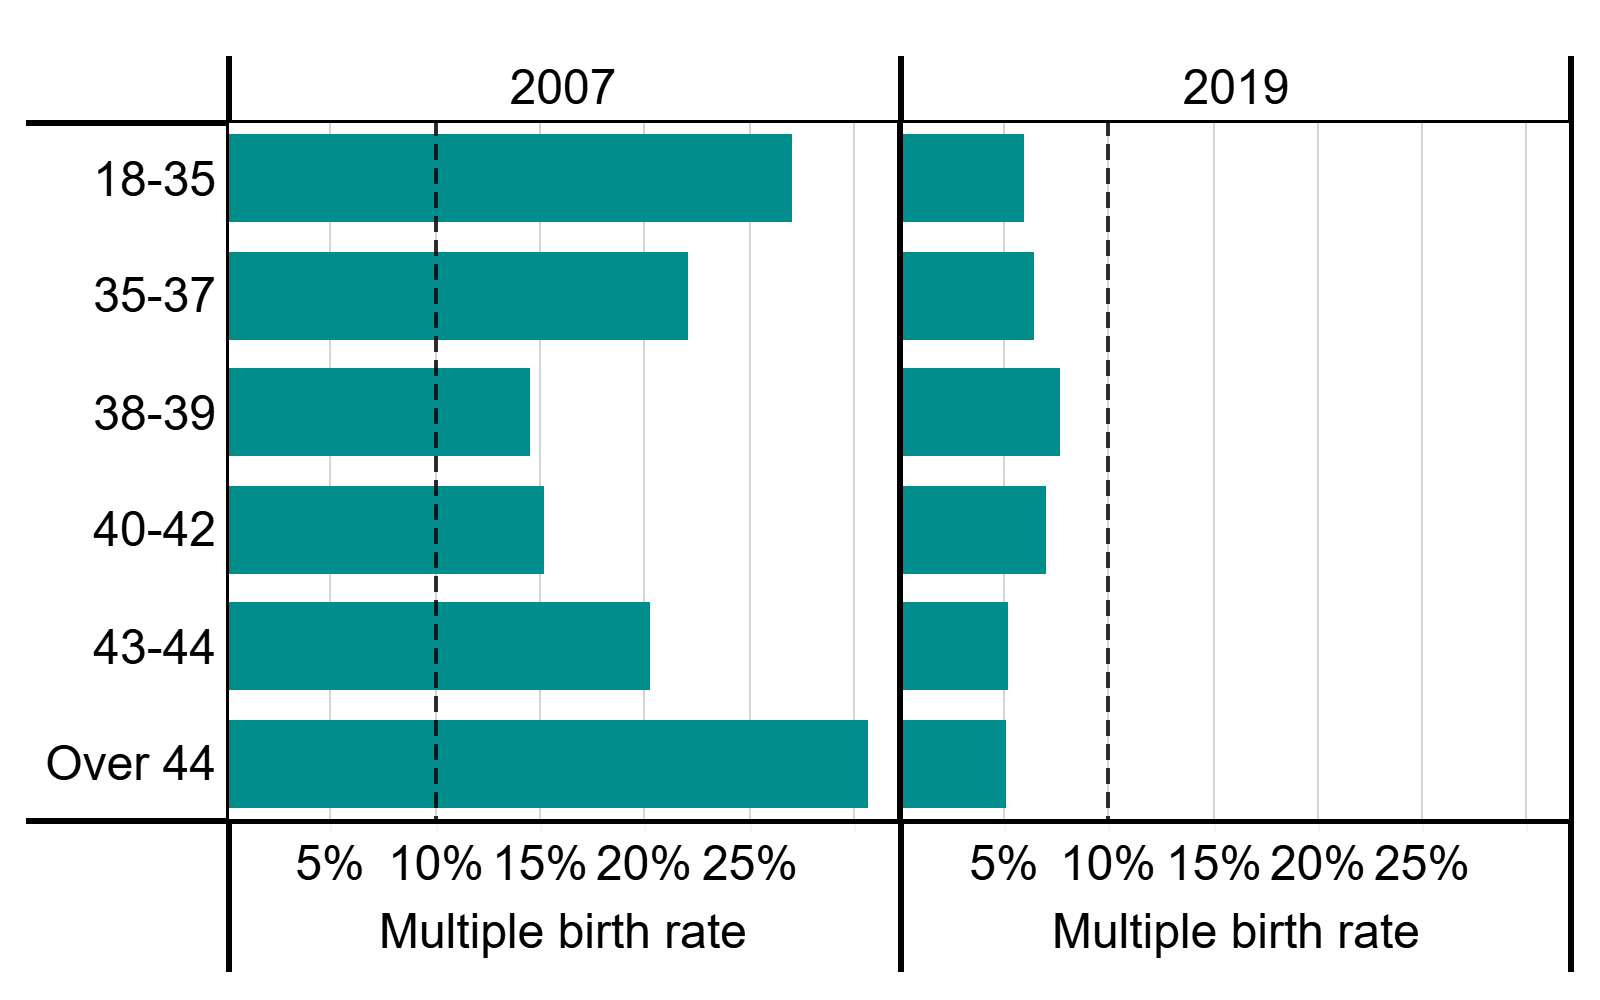 Figure 3: Average live multiple birth rate by age groups, 2007 and 2019. Average live multiple birth rate by age groups, 2007 and 2019. This bar chart shows the average multiple birth rate for banded age groups; 18-35, 35-37, 38-39, 40-42, 43-44, over 44, in 2007 and 2019. A dotted line shows the multiple birth rate target (10%) set in 2007. In 2007, all age groups were above the 10% multiple birth rate target. By 2019, all patient age groups were below the 10% target. An accessible form of the underlying data for this figure can be downloaded beneath the image in .xls format.